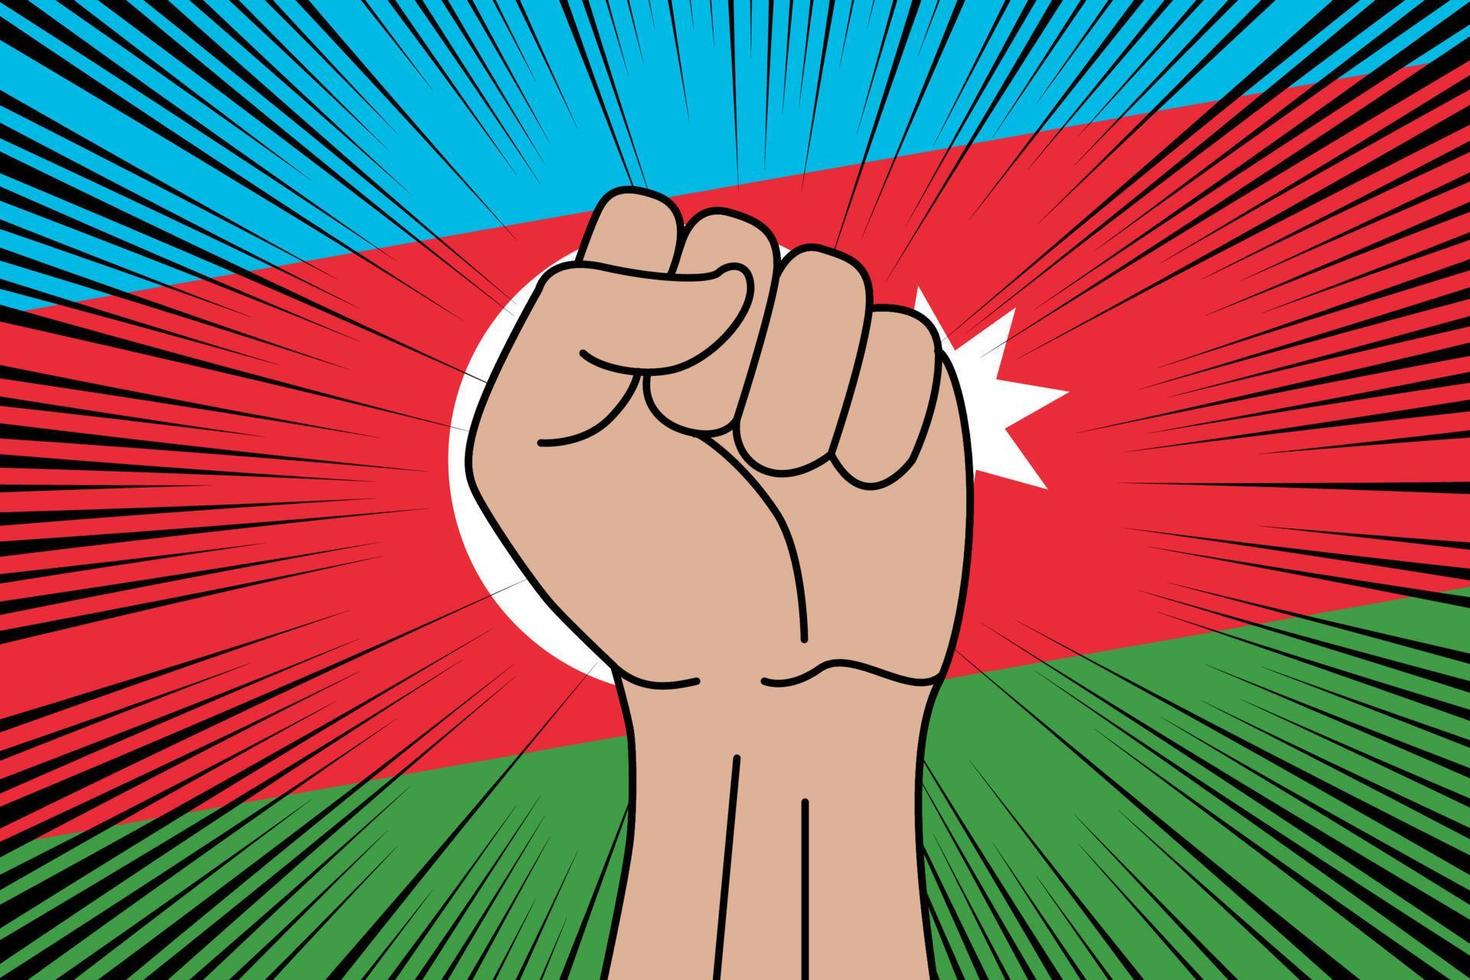 Human fist clenched symbol on flag of Azerbaijan vector